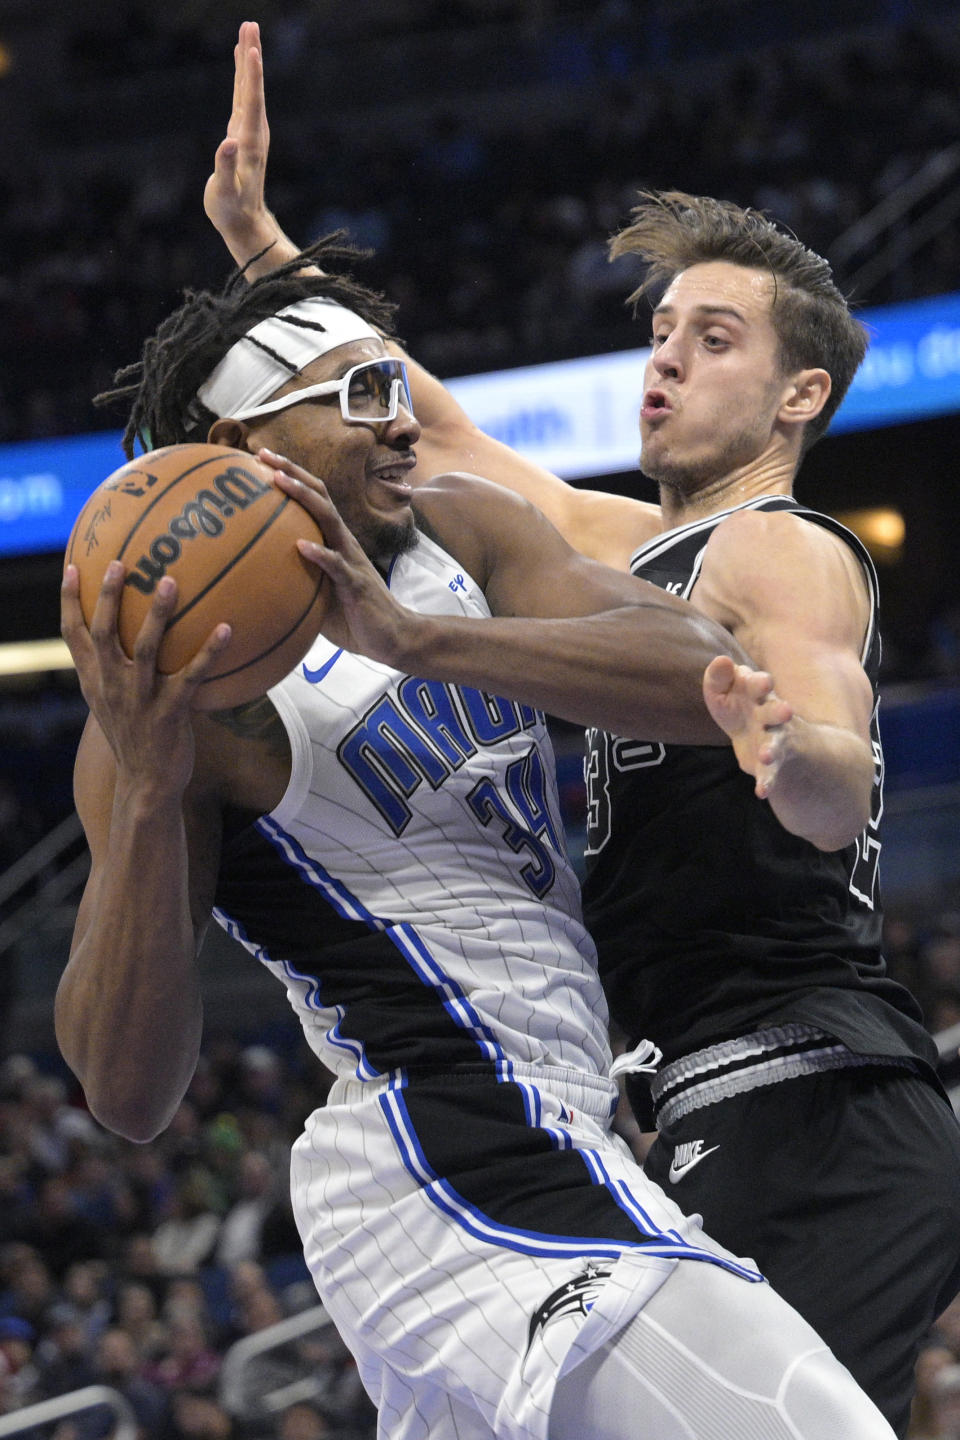 Orlando Magic center Wendell Carter Jr. (34) is fouled by San Antonio Spurs forward Zach Collins (23) while driving to the basket during the first half of an NBA basketball game Friday, Dec. 23, 2022, in Orlando, Fla. (AP Photo/Phelan M. Ebenhack)